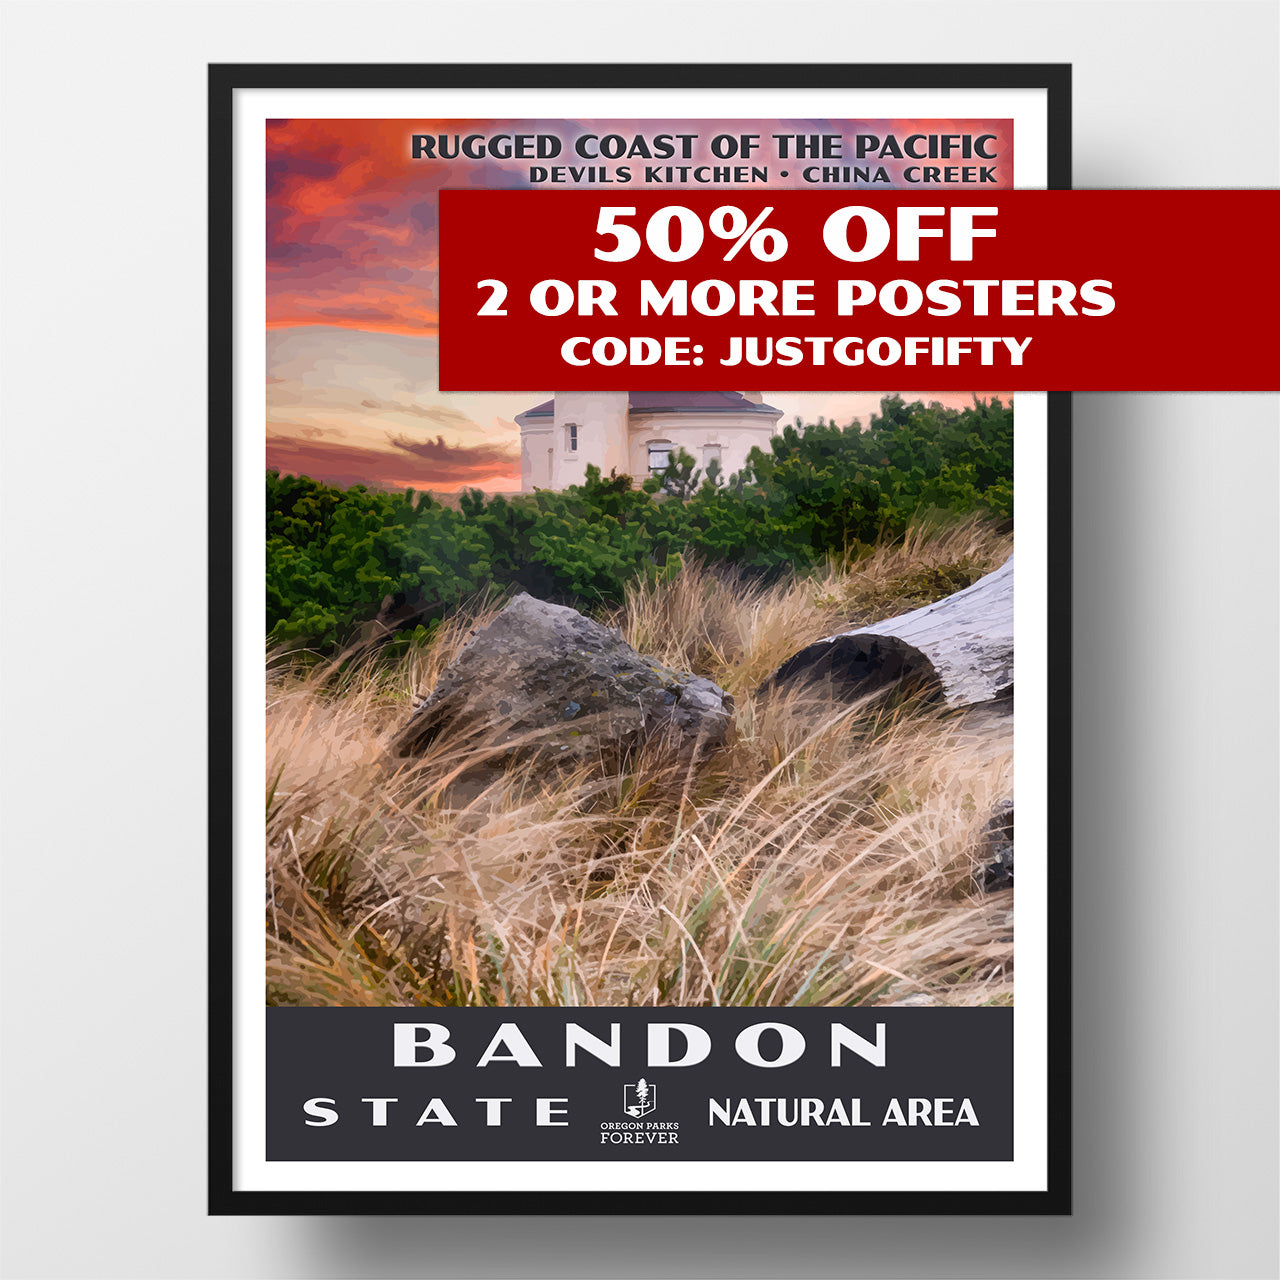 Bandon State Natural Area Poster - WPA (Coquille River Lighthouse at Sunset) - OPF